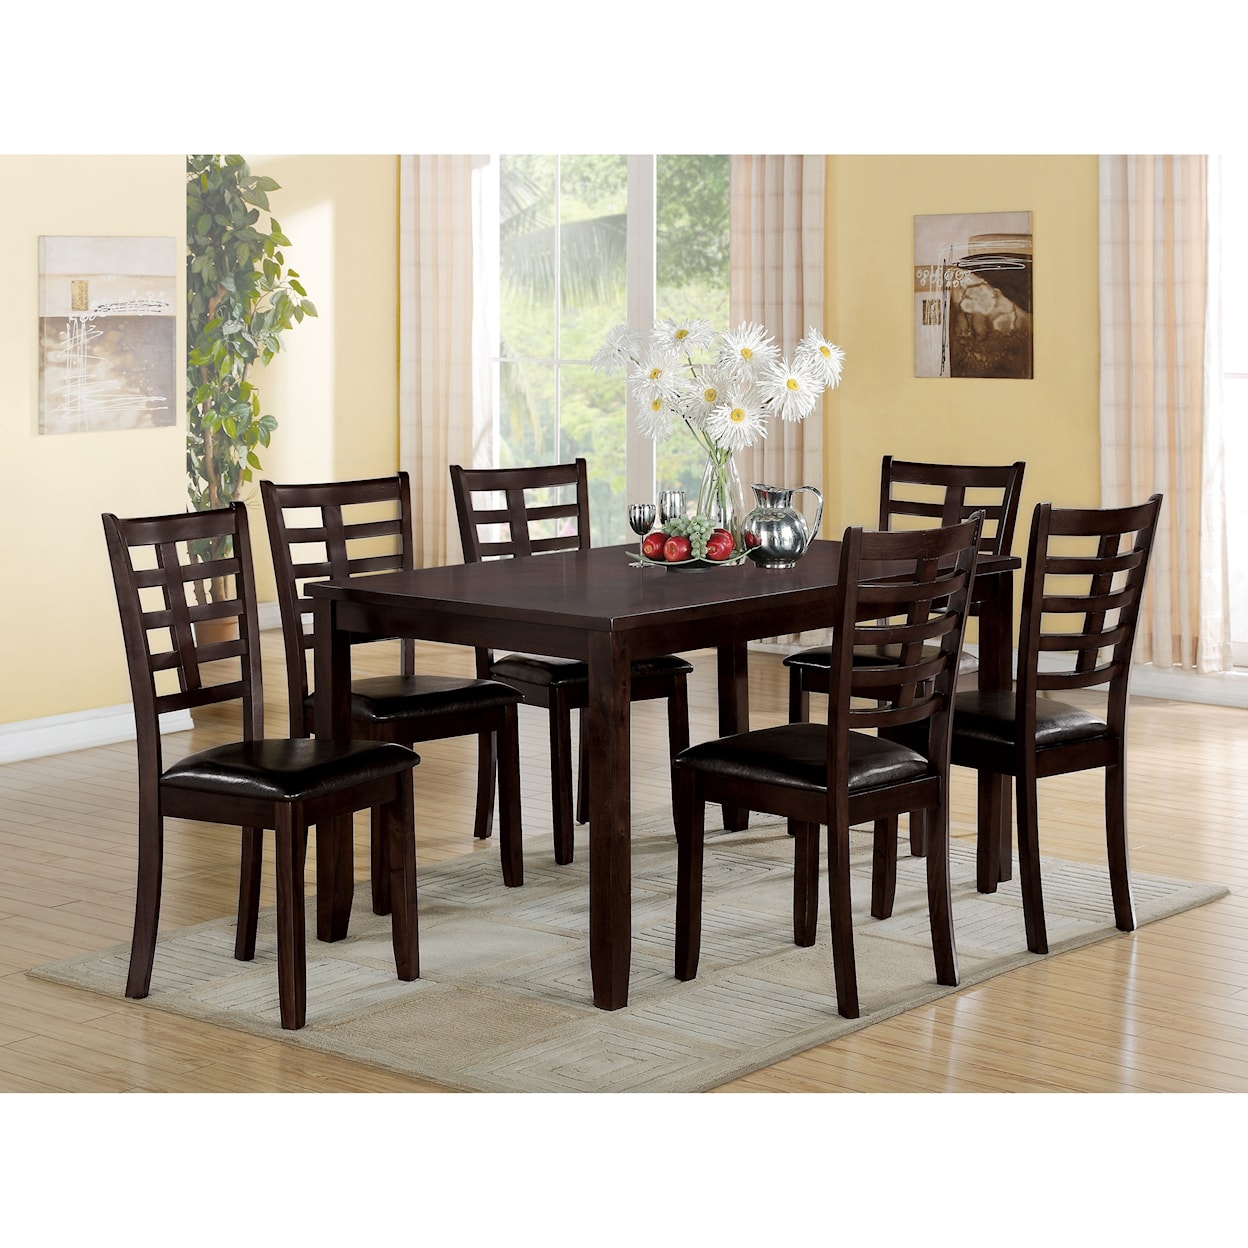 Acme Furniture Tahlia Dining Set with 6 Side Chairs